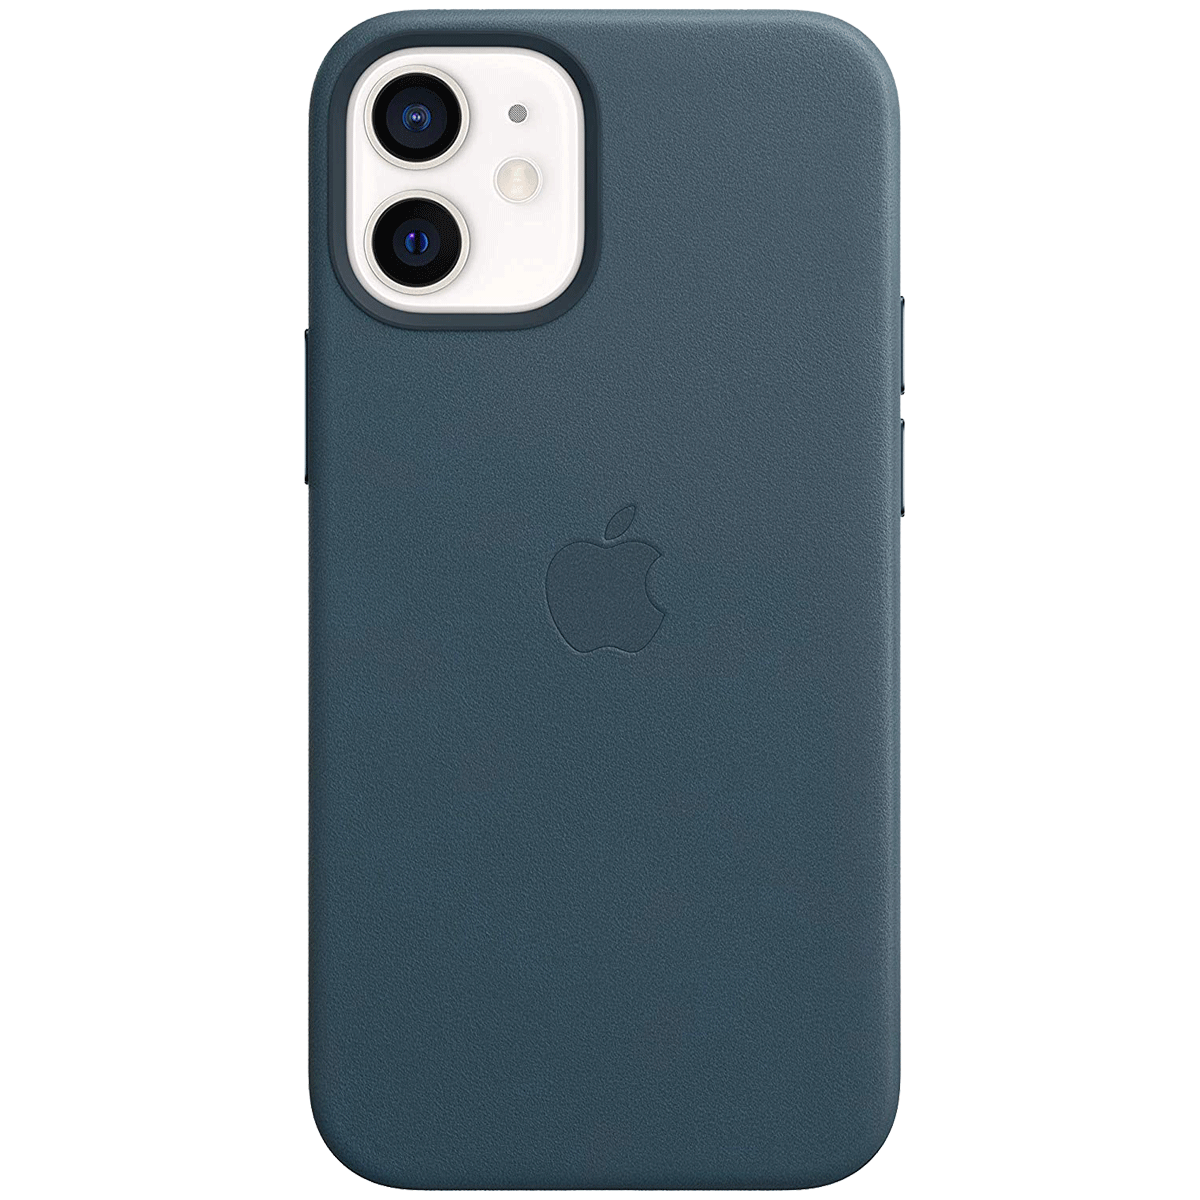  Apple Leather Back Case For iPhone 12 Mini (Magsafe Charging Accessibility, MHK83ZM/A, Baltic Blue)_1